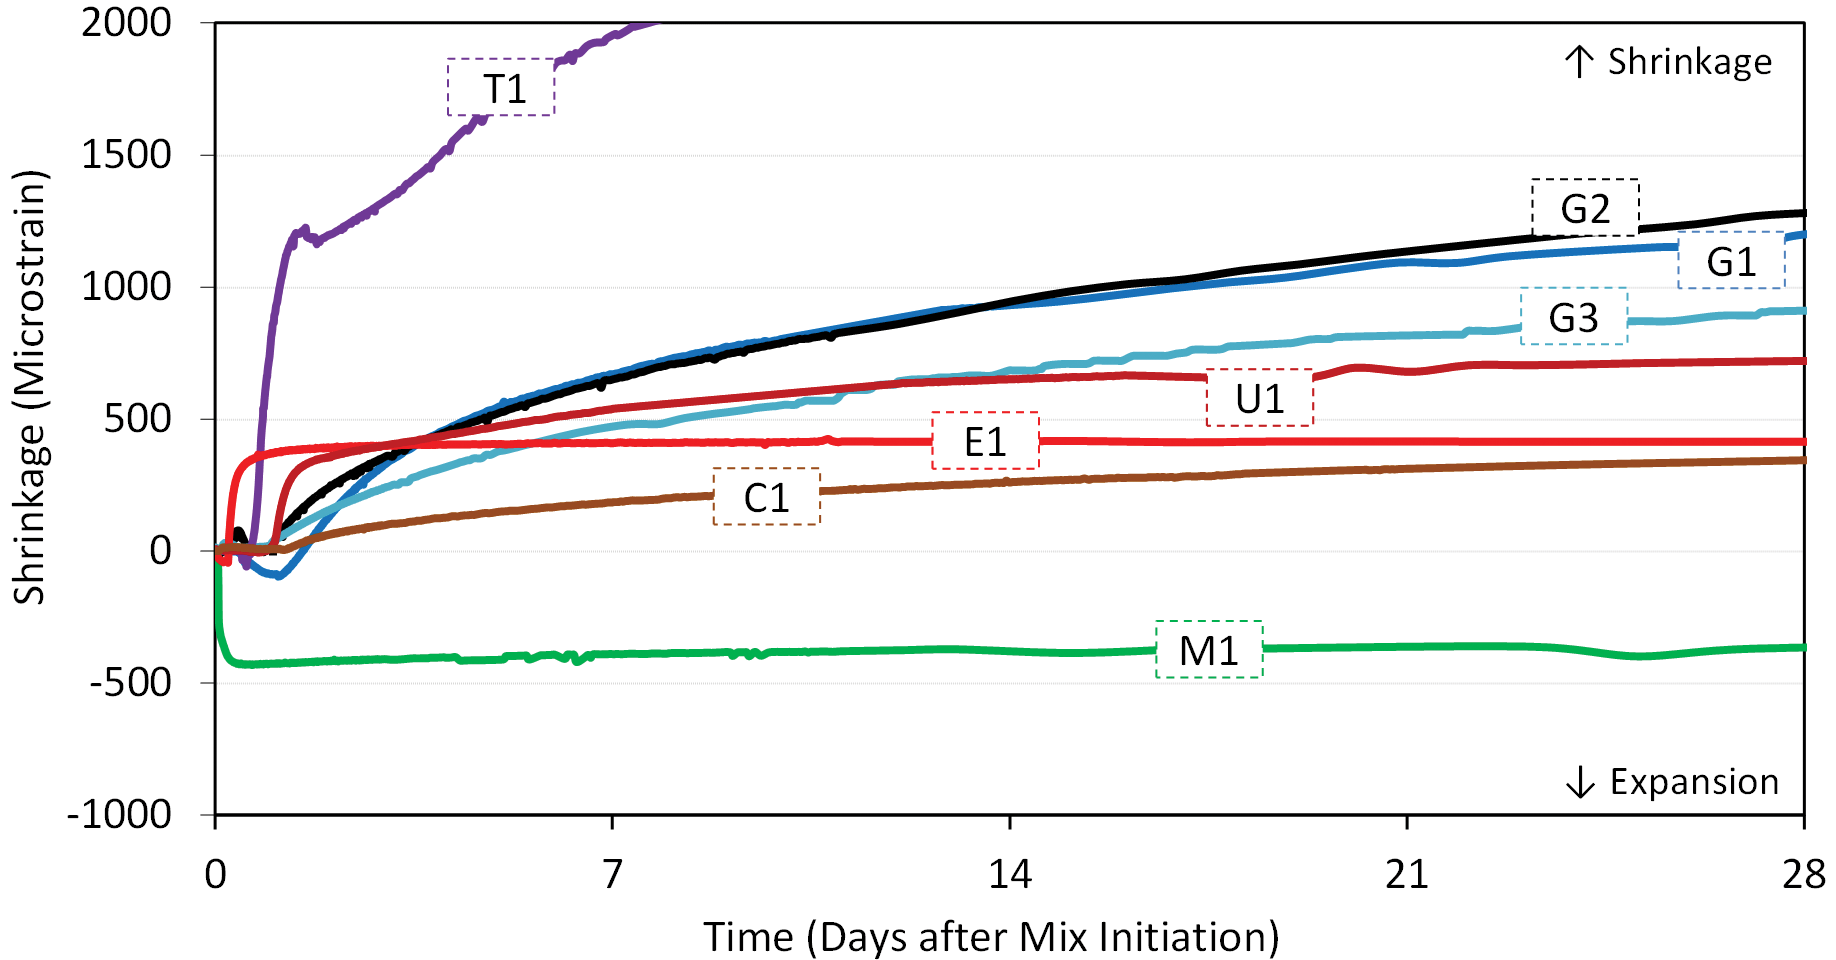 This line graph shows the shrinkage results for eight grouts from the time of mix initiation through 28 days. Grout M1 quickly expands during the first hour, then stabilizes at approximately 450 microstrain of expansion. Grout E1 expands slightly, then shrinks to stabilize at approximately 400 microstrain of overall shrinkage at 1 day. Grout T1 is dormant for nearly 1 day, then quickly shrinks until more than 1,000 microstrain of shrinkage is observed at 1 day and more than 2,000 microstrain of shrinkage is observed at 7 days. Grout U1 is dormant for more than 1 day before quickly shrinking to approximately 400 microstrain by 3 days, then steadily increasing to approximately 750 microstrain by 28 days. Grouts G1, G2, and G3 all show very little movement for more than 1 day, after which they begin to steadily shrink. Grouts G1 and G2 exhibit approximately 600 microstrain of shrinkage at 7 days and 1,200 microstrain of shrinkage at 28 days. Grout G3 exhibits 500 microstrain of shrinkage at 7 days and 900 microstrain of shrinkage at 28 days. Conventional concrete C1 exhibited 200 microstrain of shrinkage at 7 days and 350 microstrain of shrinkage at 28 days.